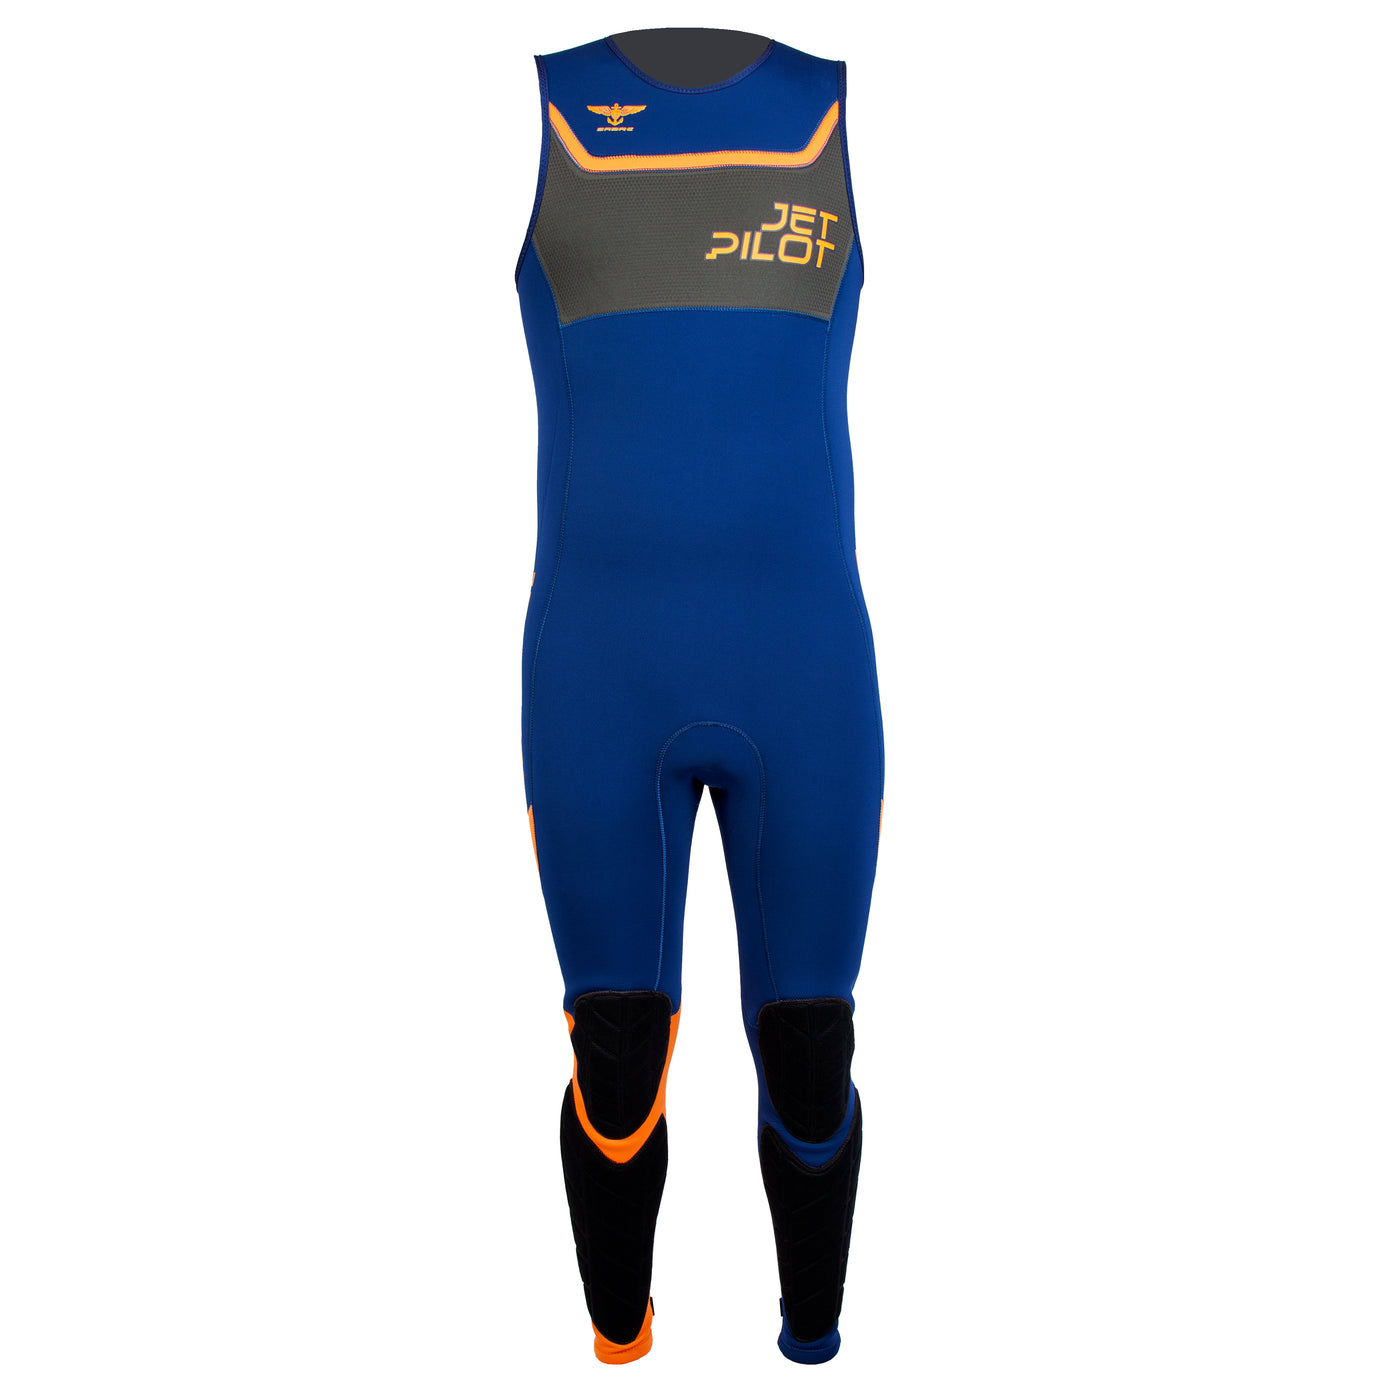 Front view of the Jetpilot F-86 Sabre John wetsuit Navy colorway.